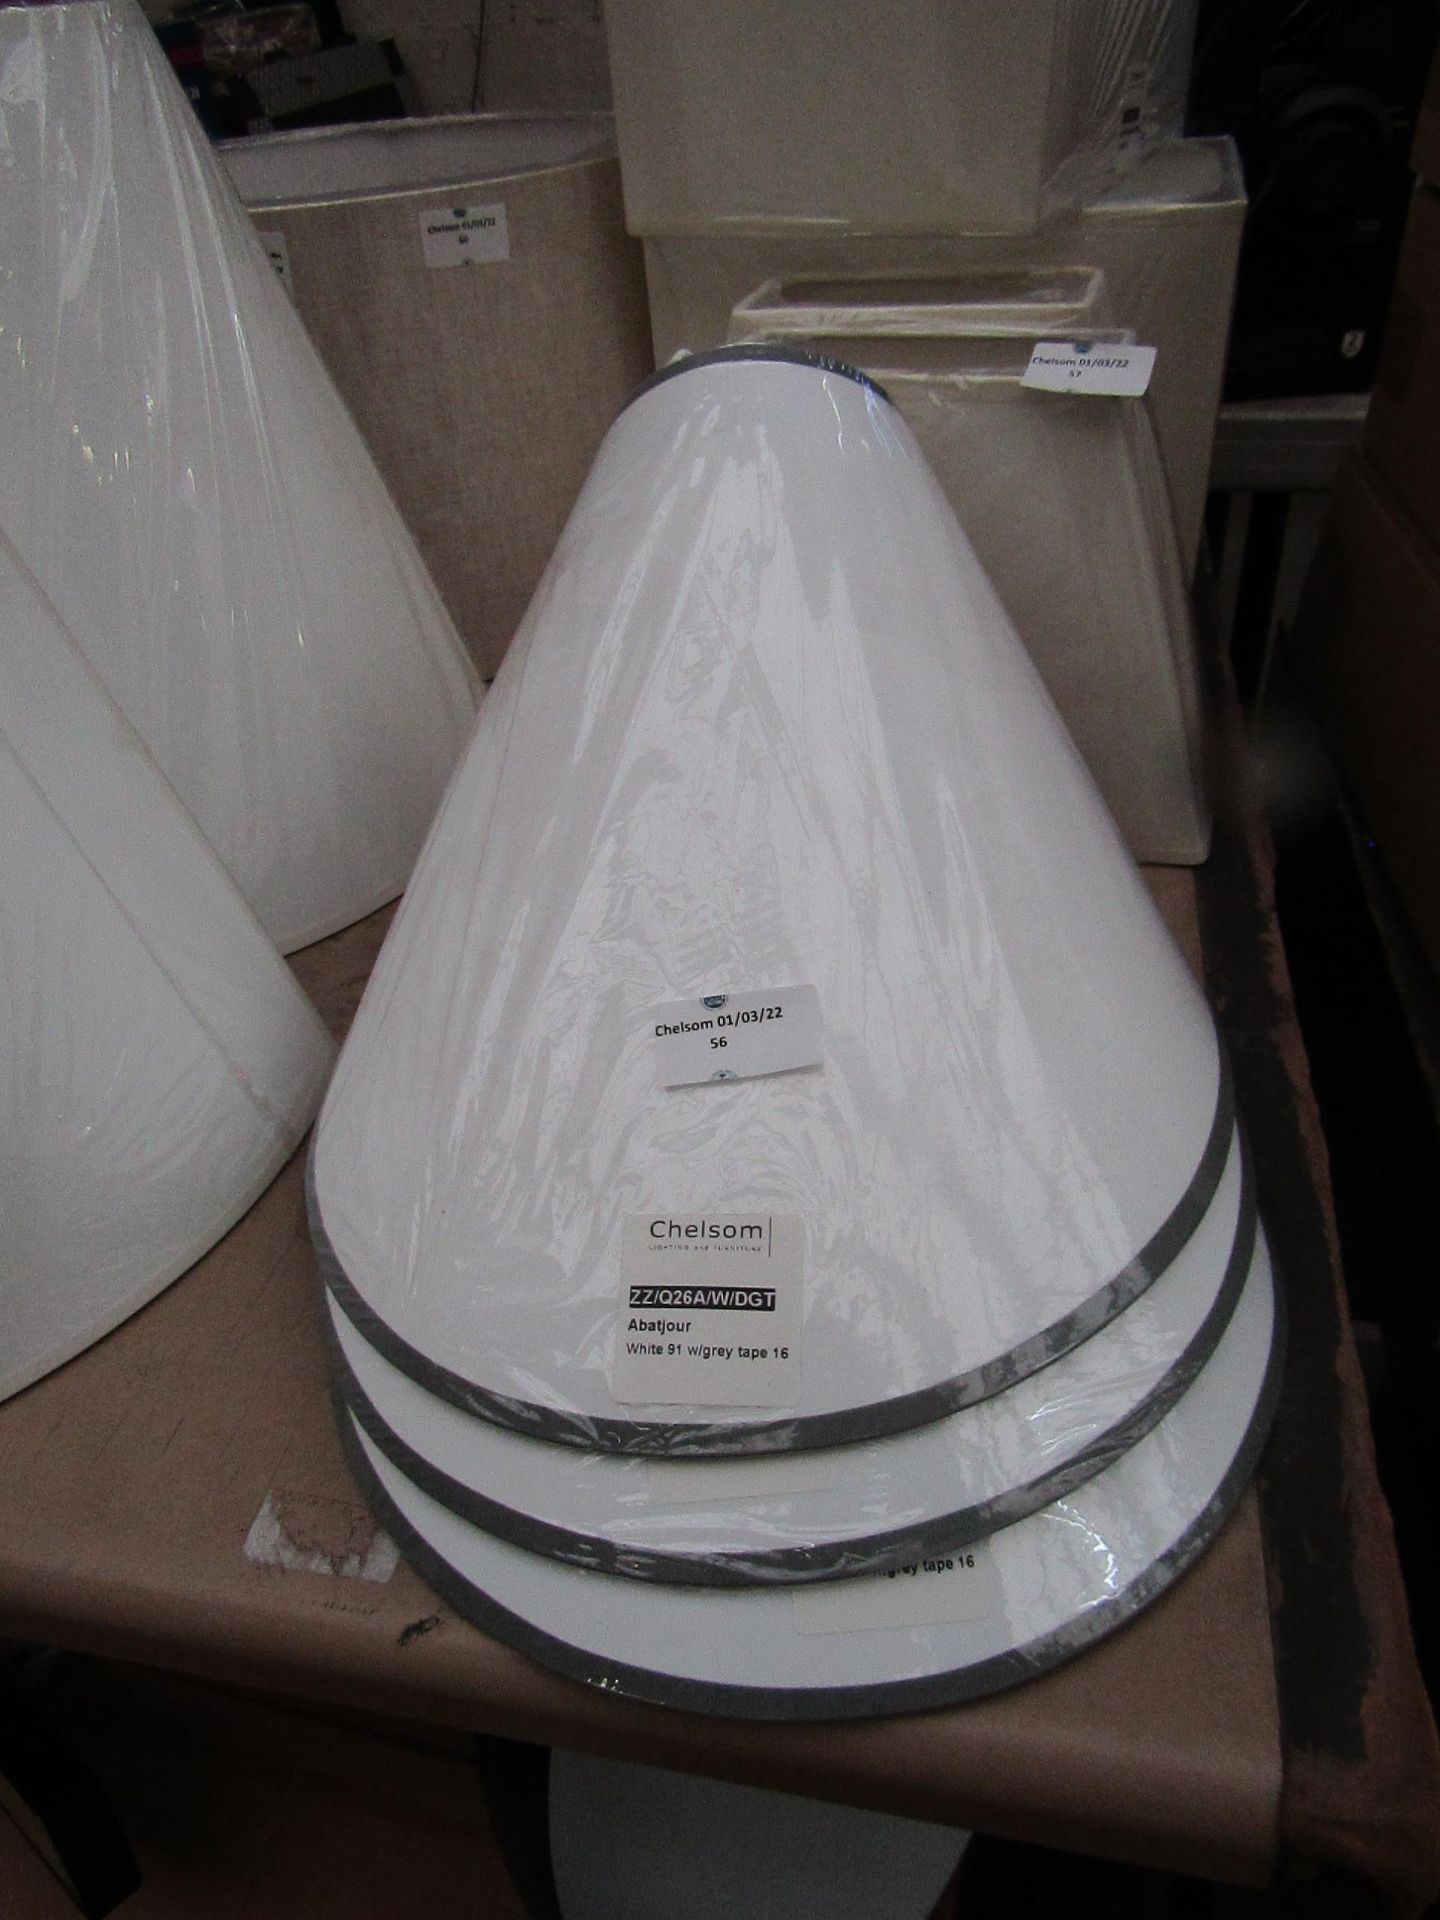 3x Chelsom angled lamp shade, new.